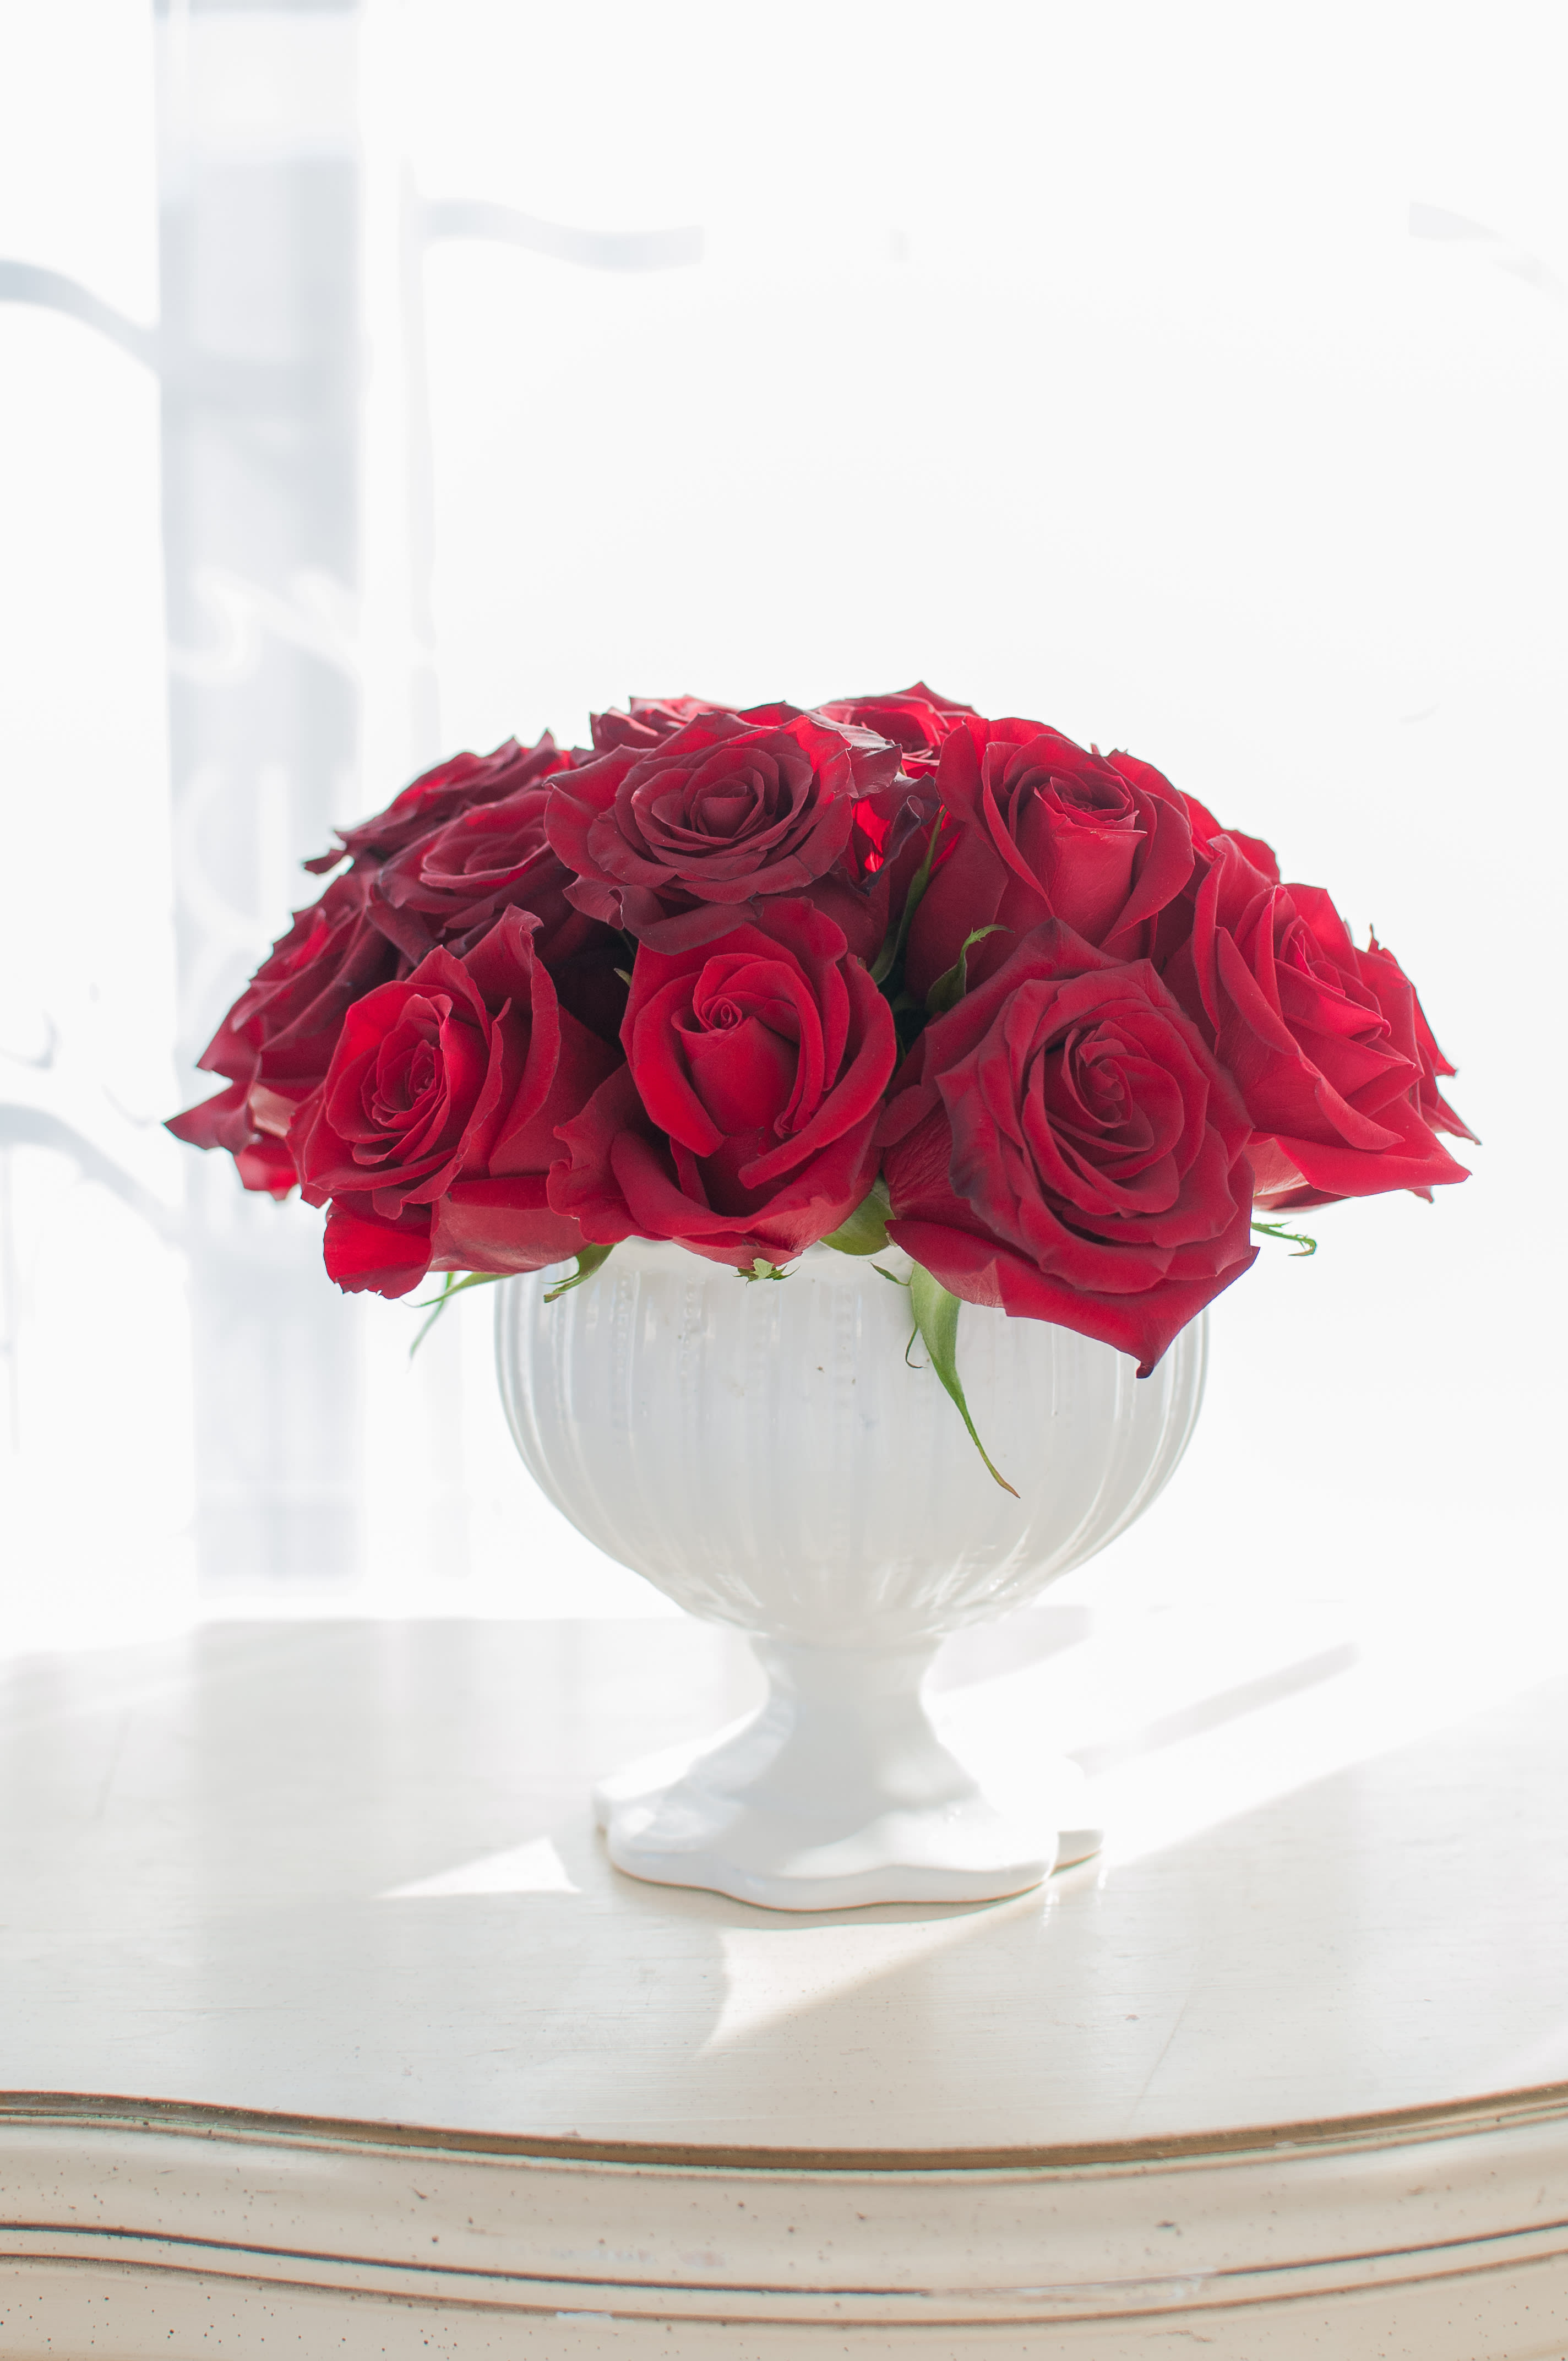 Red Rose Pedestal - We just love this chic pedestal arrangement filled with red roses! So simple, but yet so elegant! There are approx 20 roses in this arrangement.  (Photo Credit: Simpson Portraits)